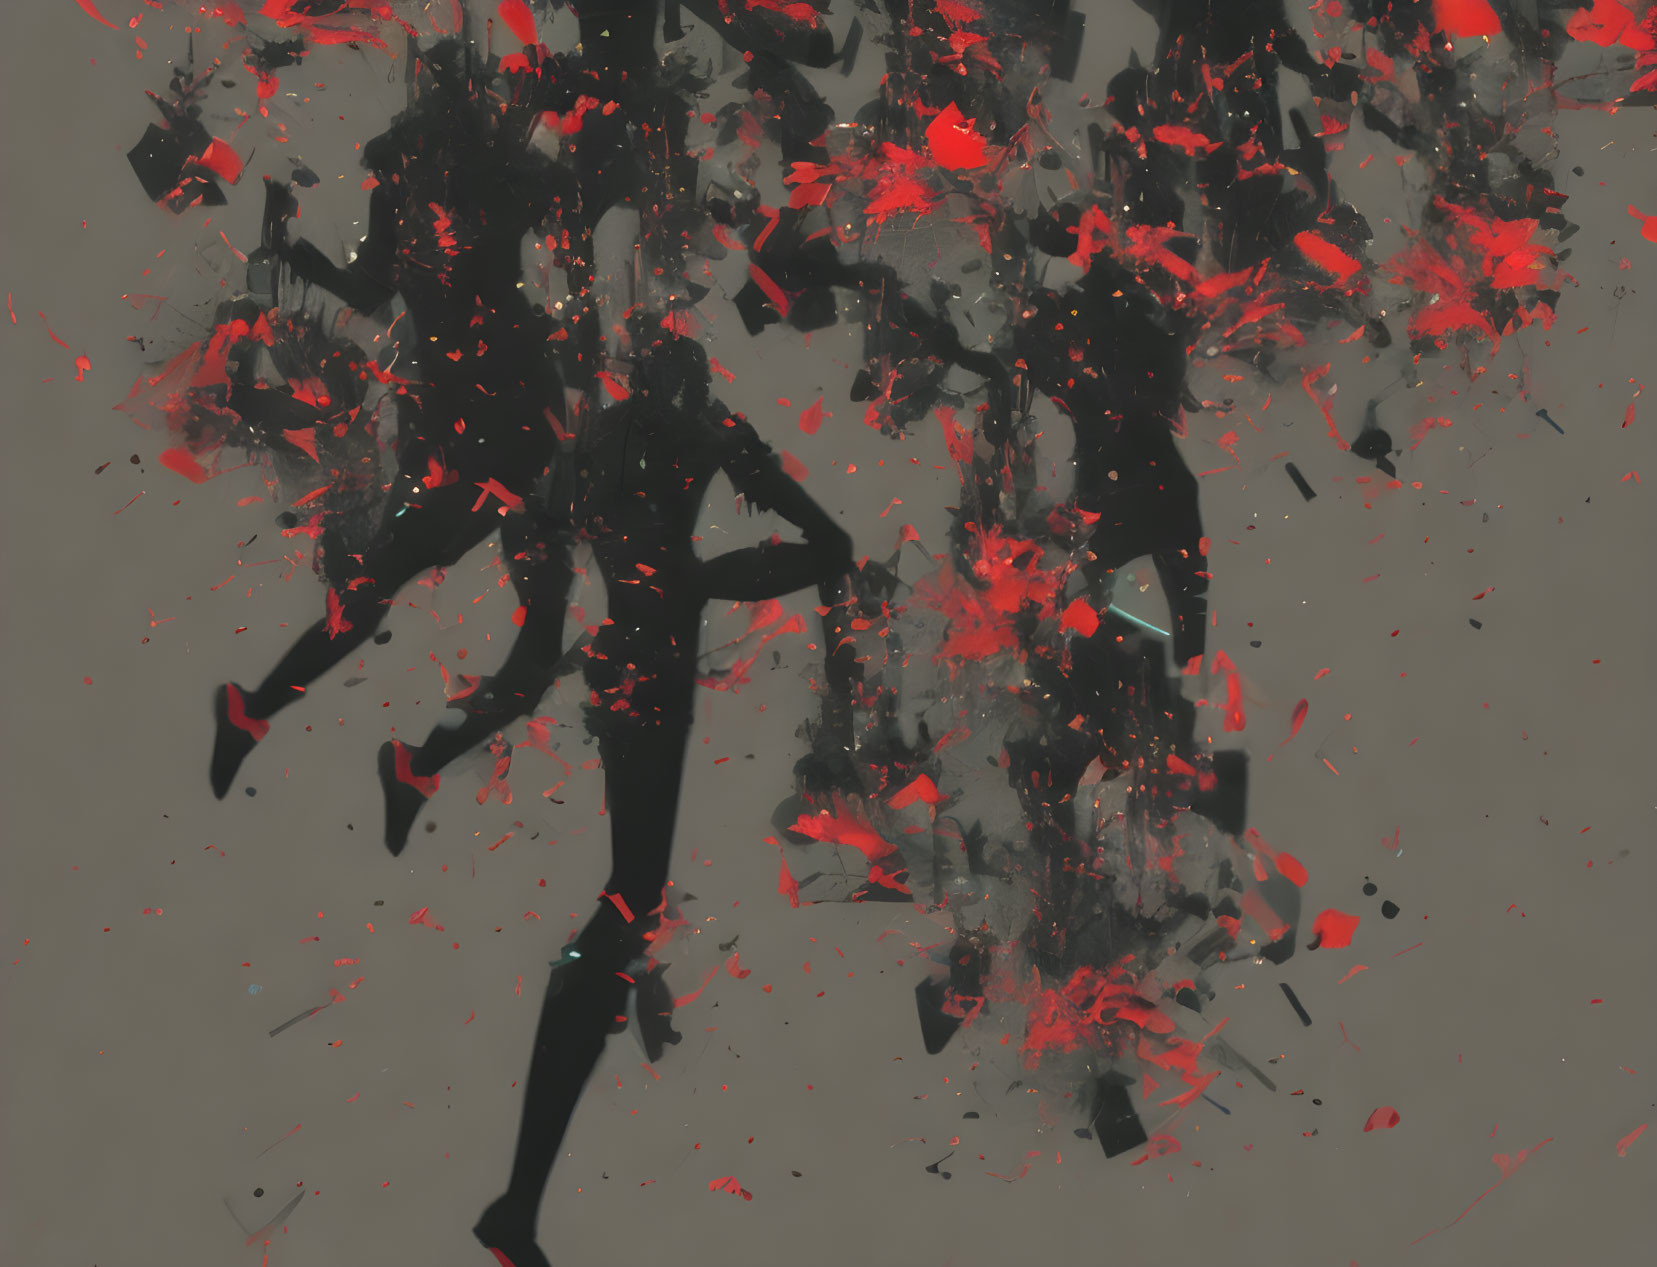 Silhouetted Figures in Abstract Art with Black and Red Explosive Fragments